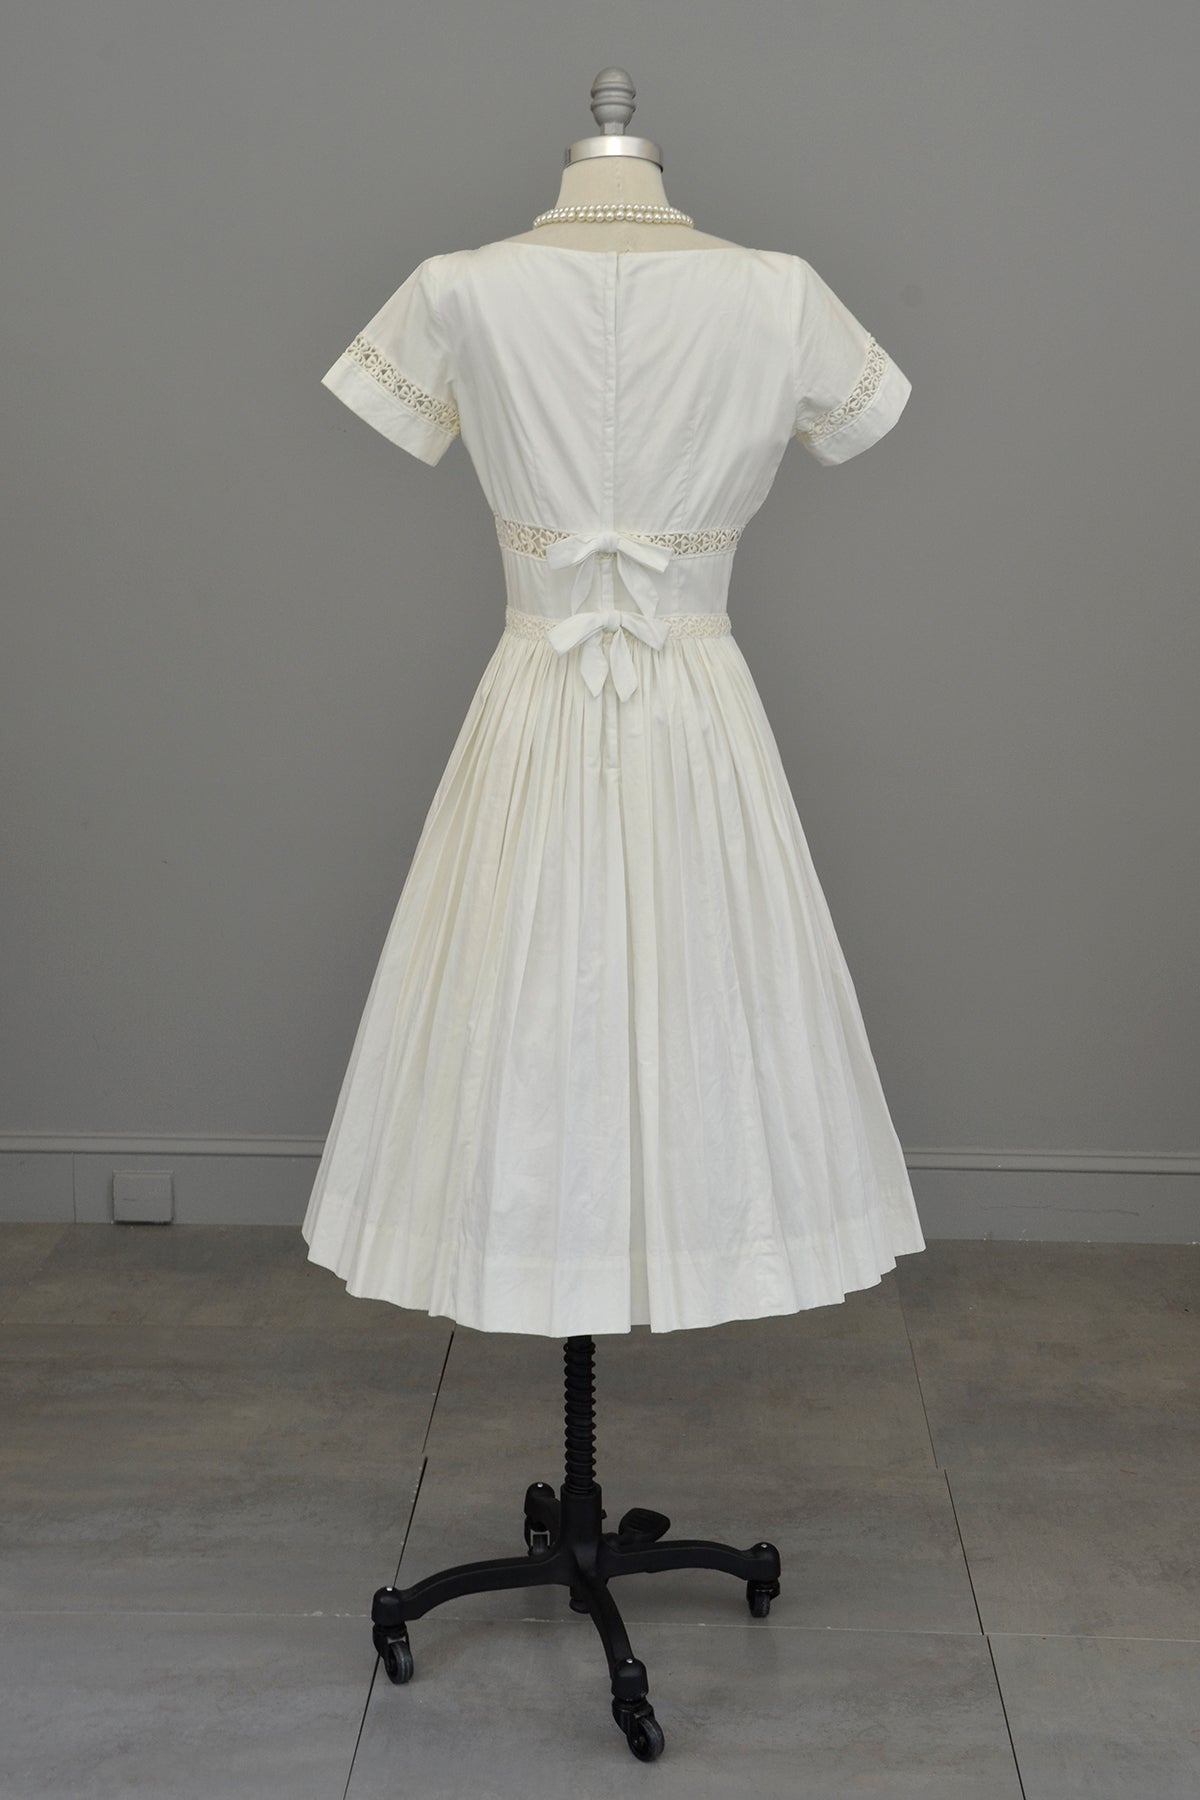 1950s 60s White Eyelet Fit and Flare Wedding Party Dress | Vintage Wedding